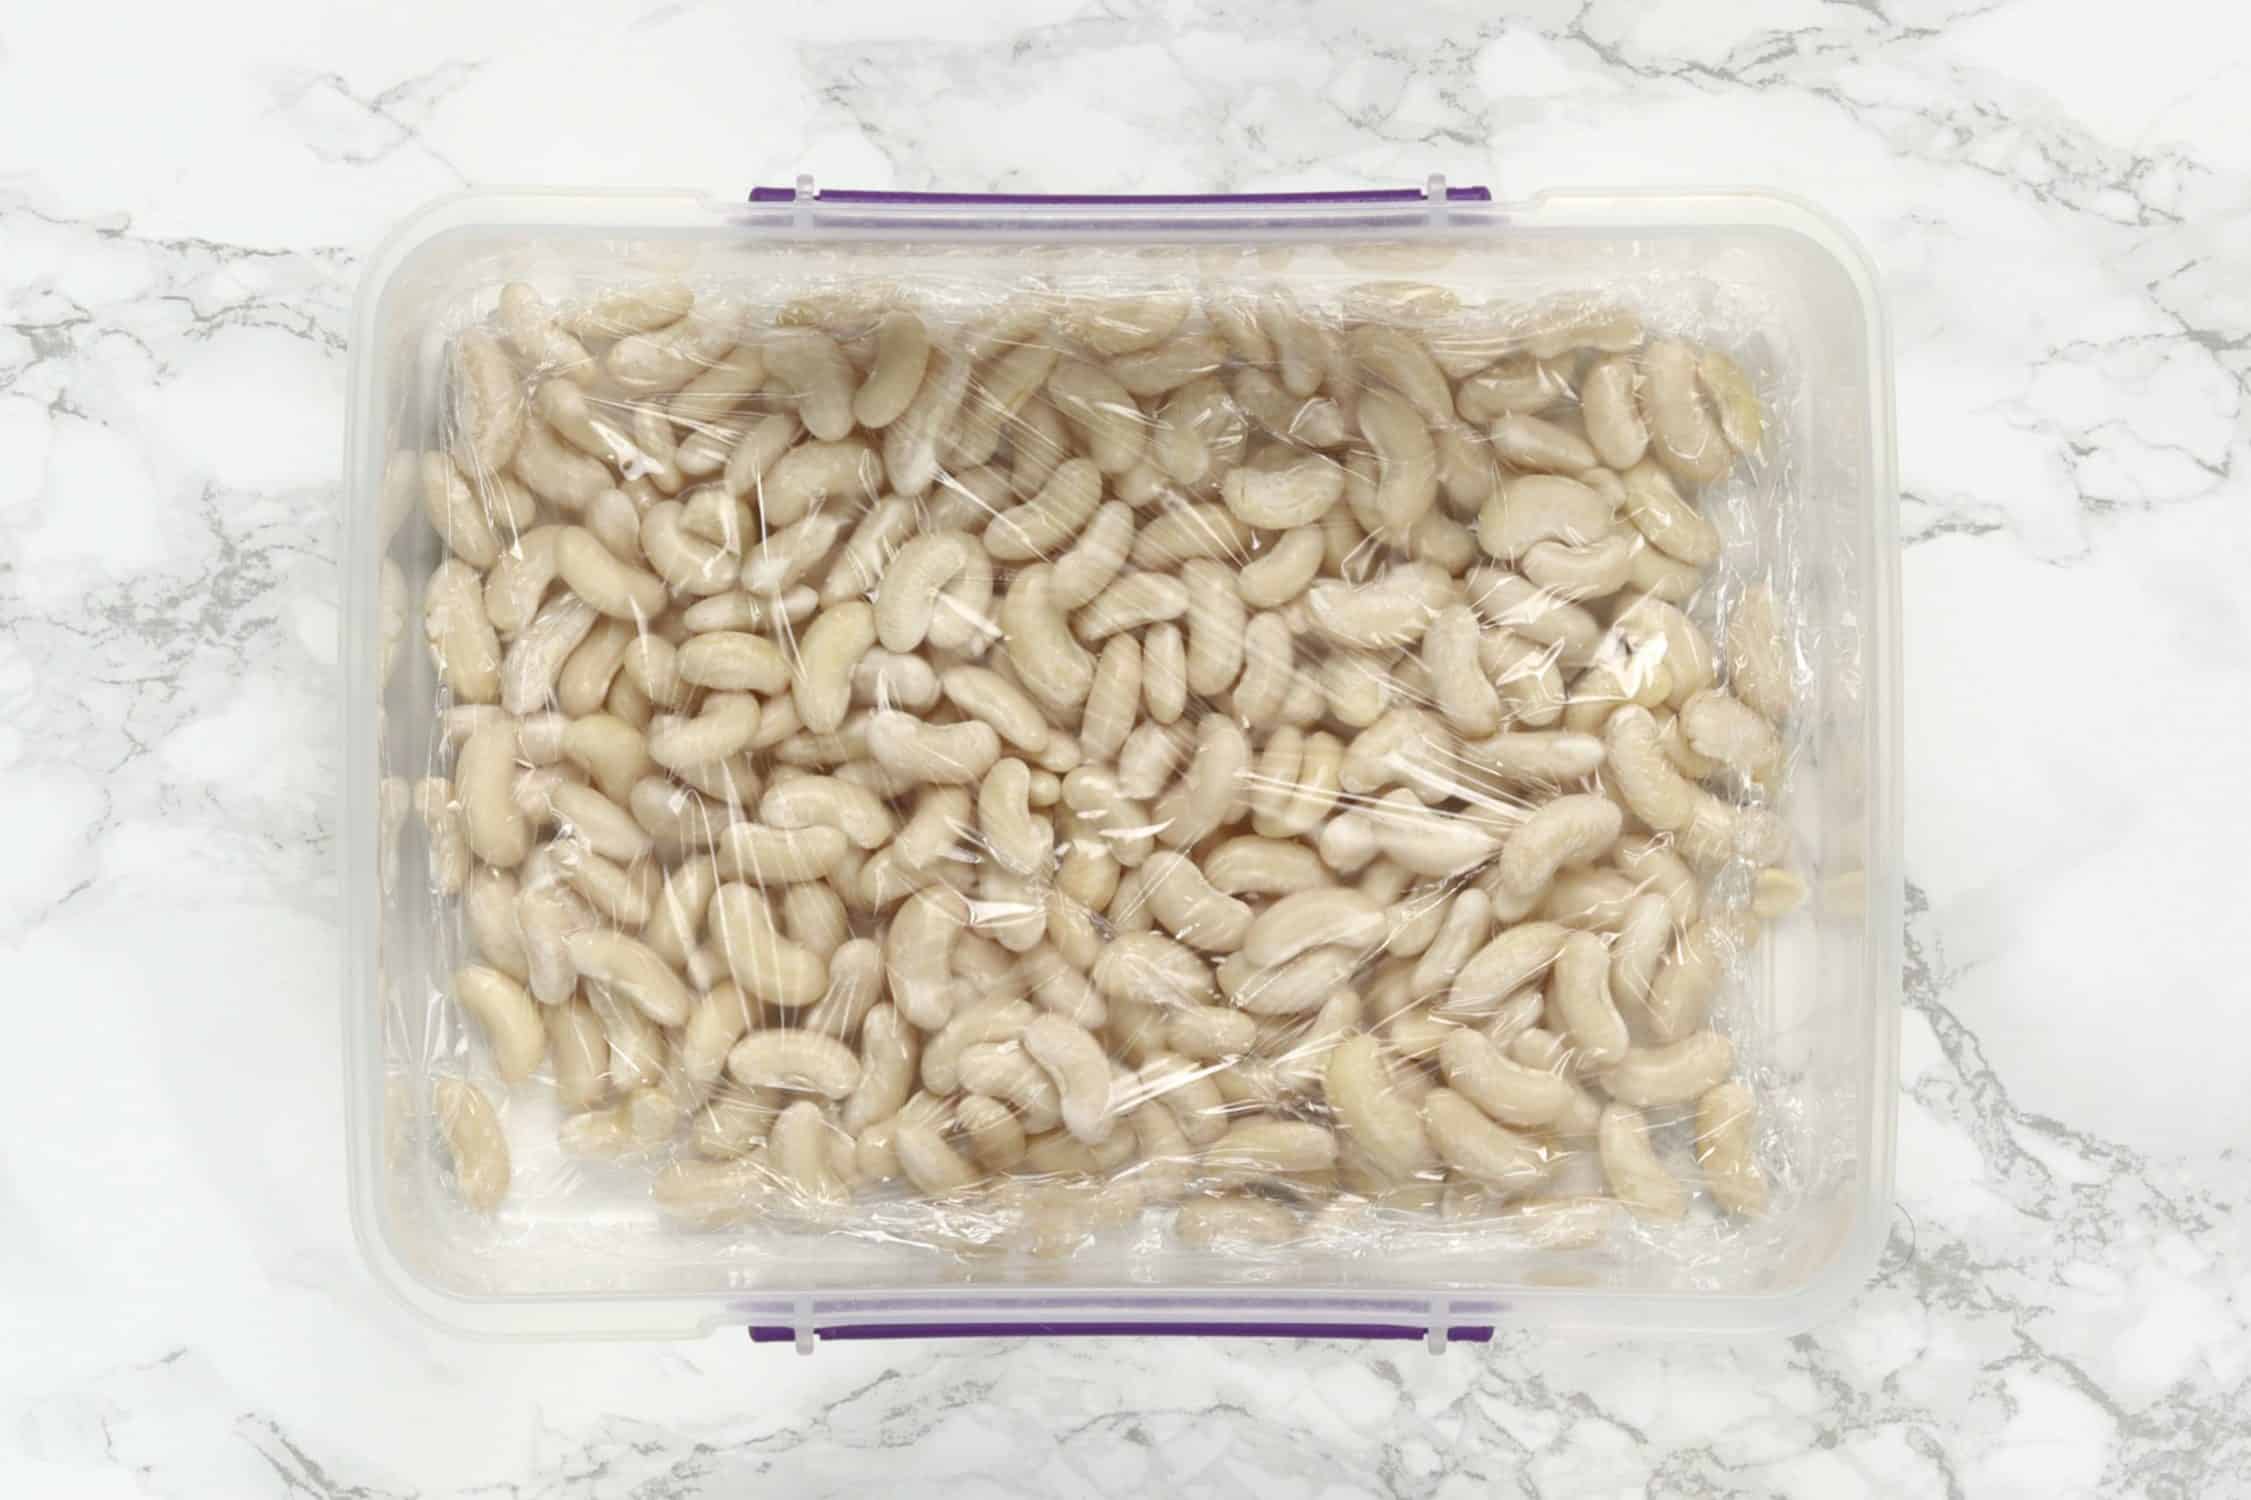 How To Store Soaked Beans